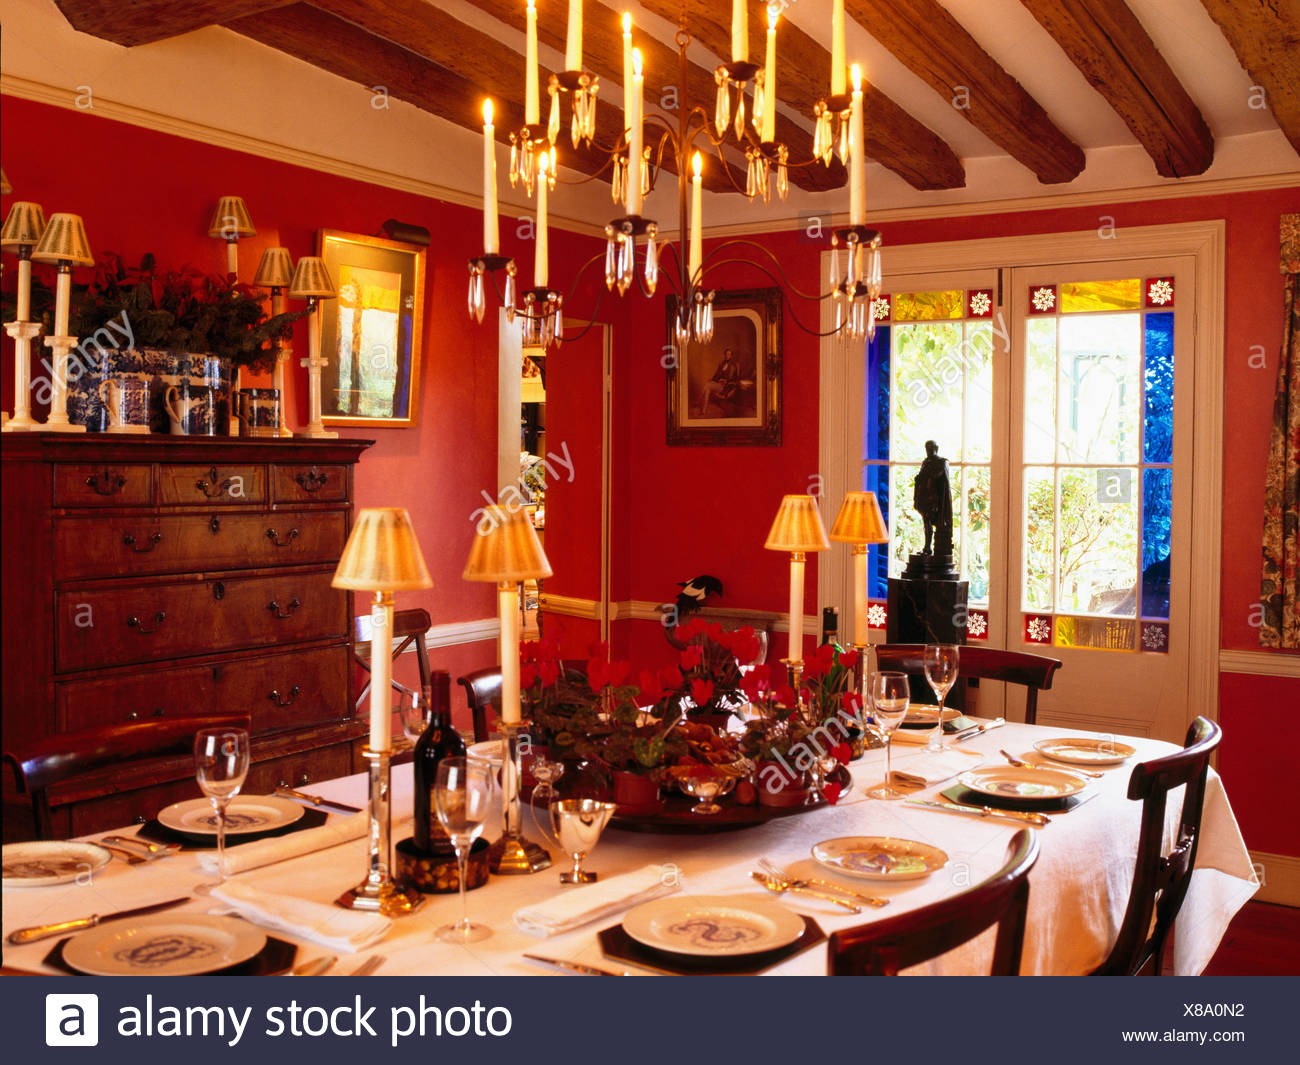 Lighted Candles In Chandelier Above Table Set For Lunch In